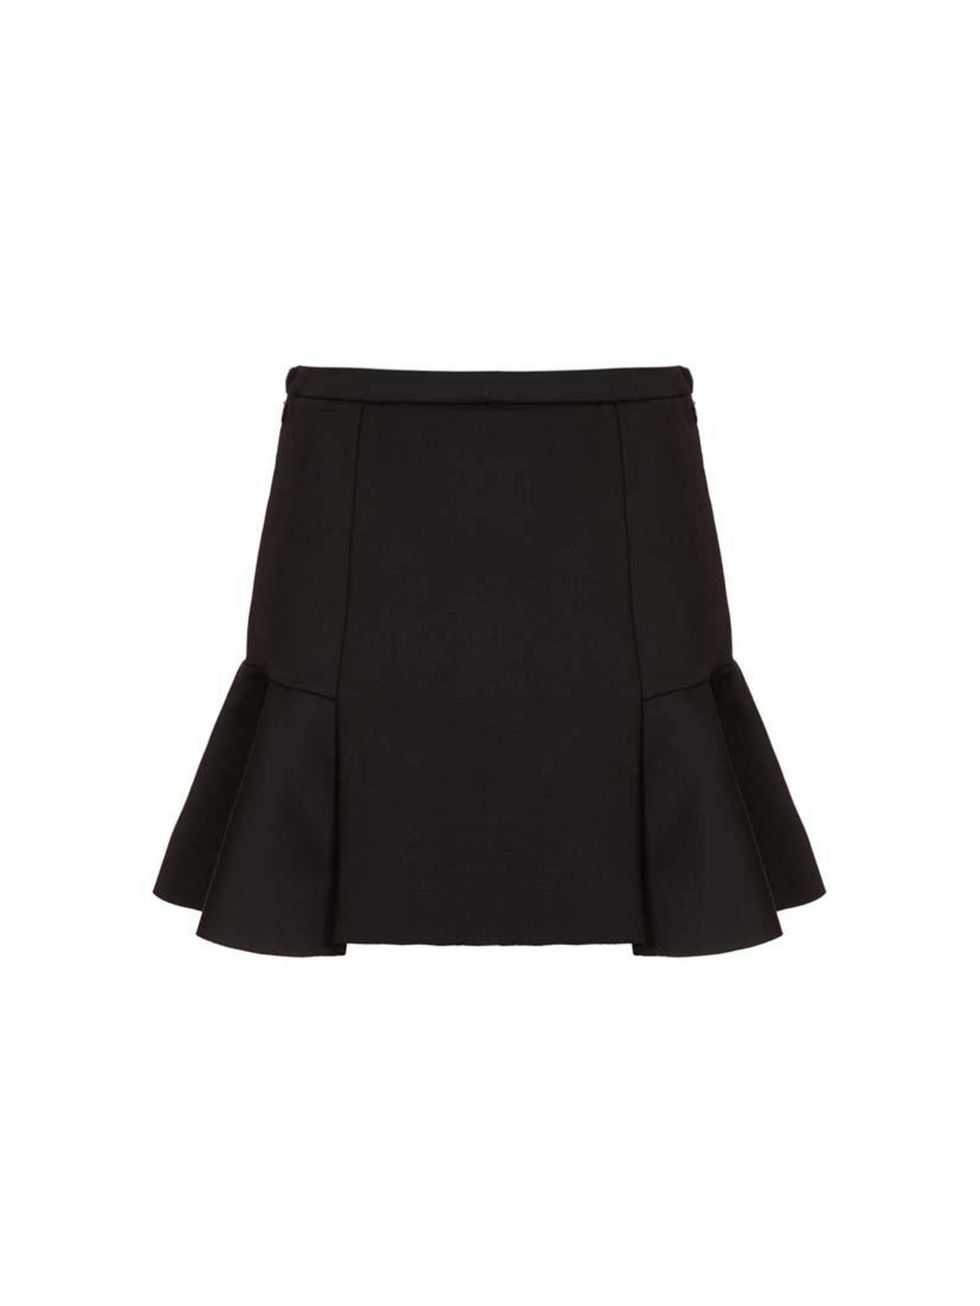 <p>Start the outfit with a short black skirt...</p><p>This one is from <a href="http://www.topshop.com/en/tsuk/product/clothing-427/skirts-449/fit-and-flare-scuba-skirt-2594045?bi=41&amp;ps=20">Topshop</a>, £32</p>